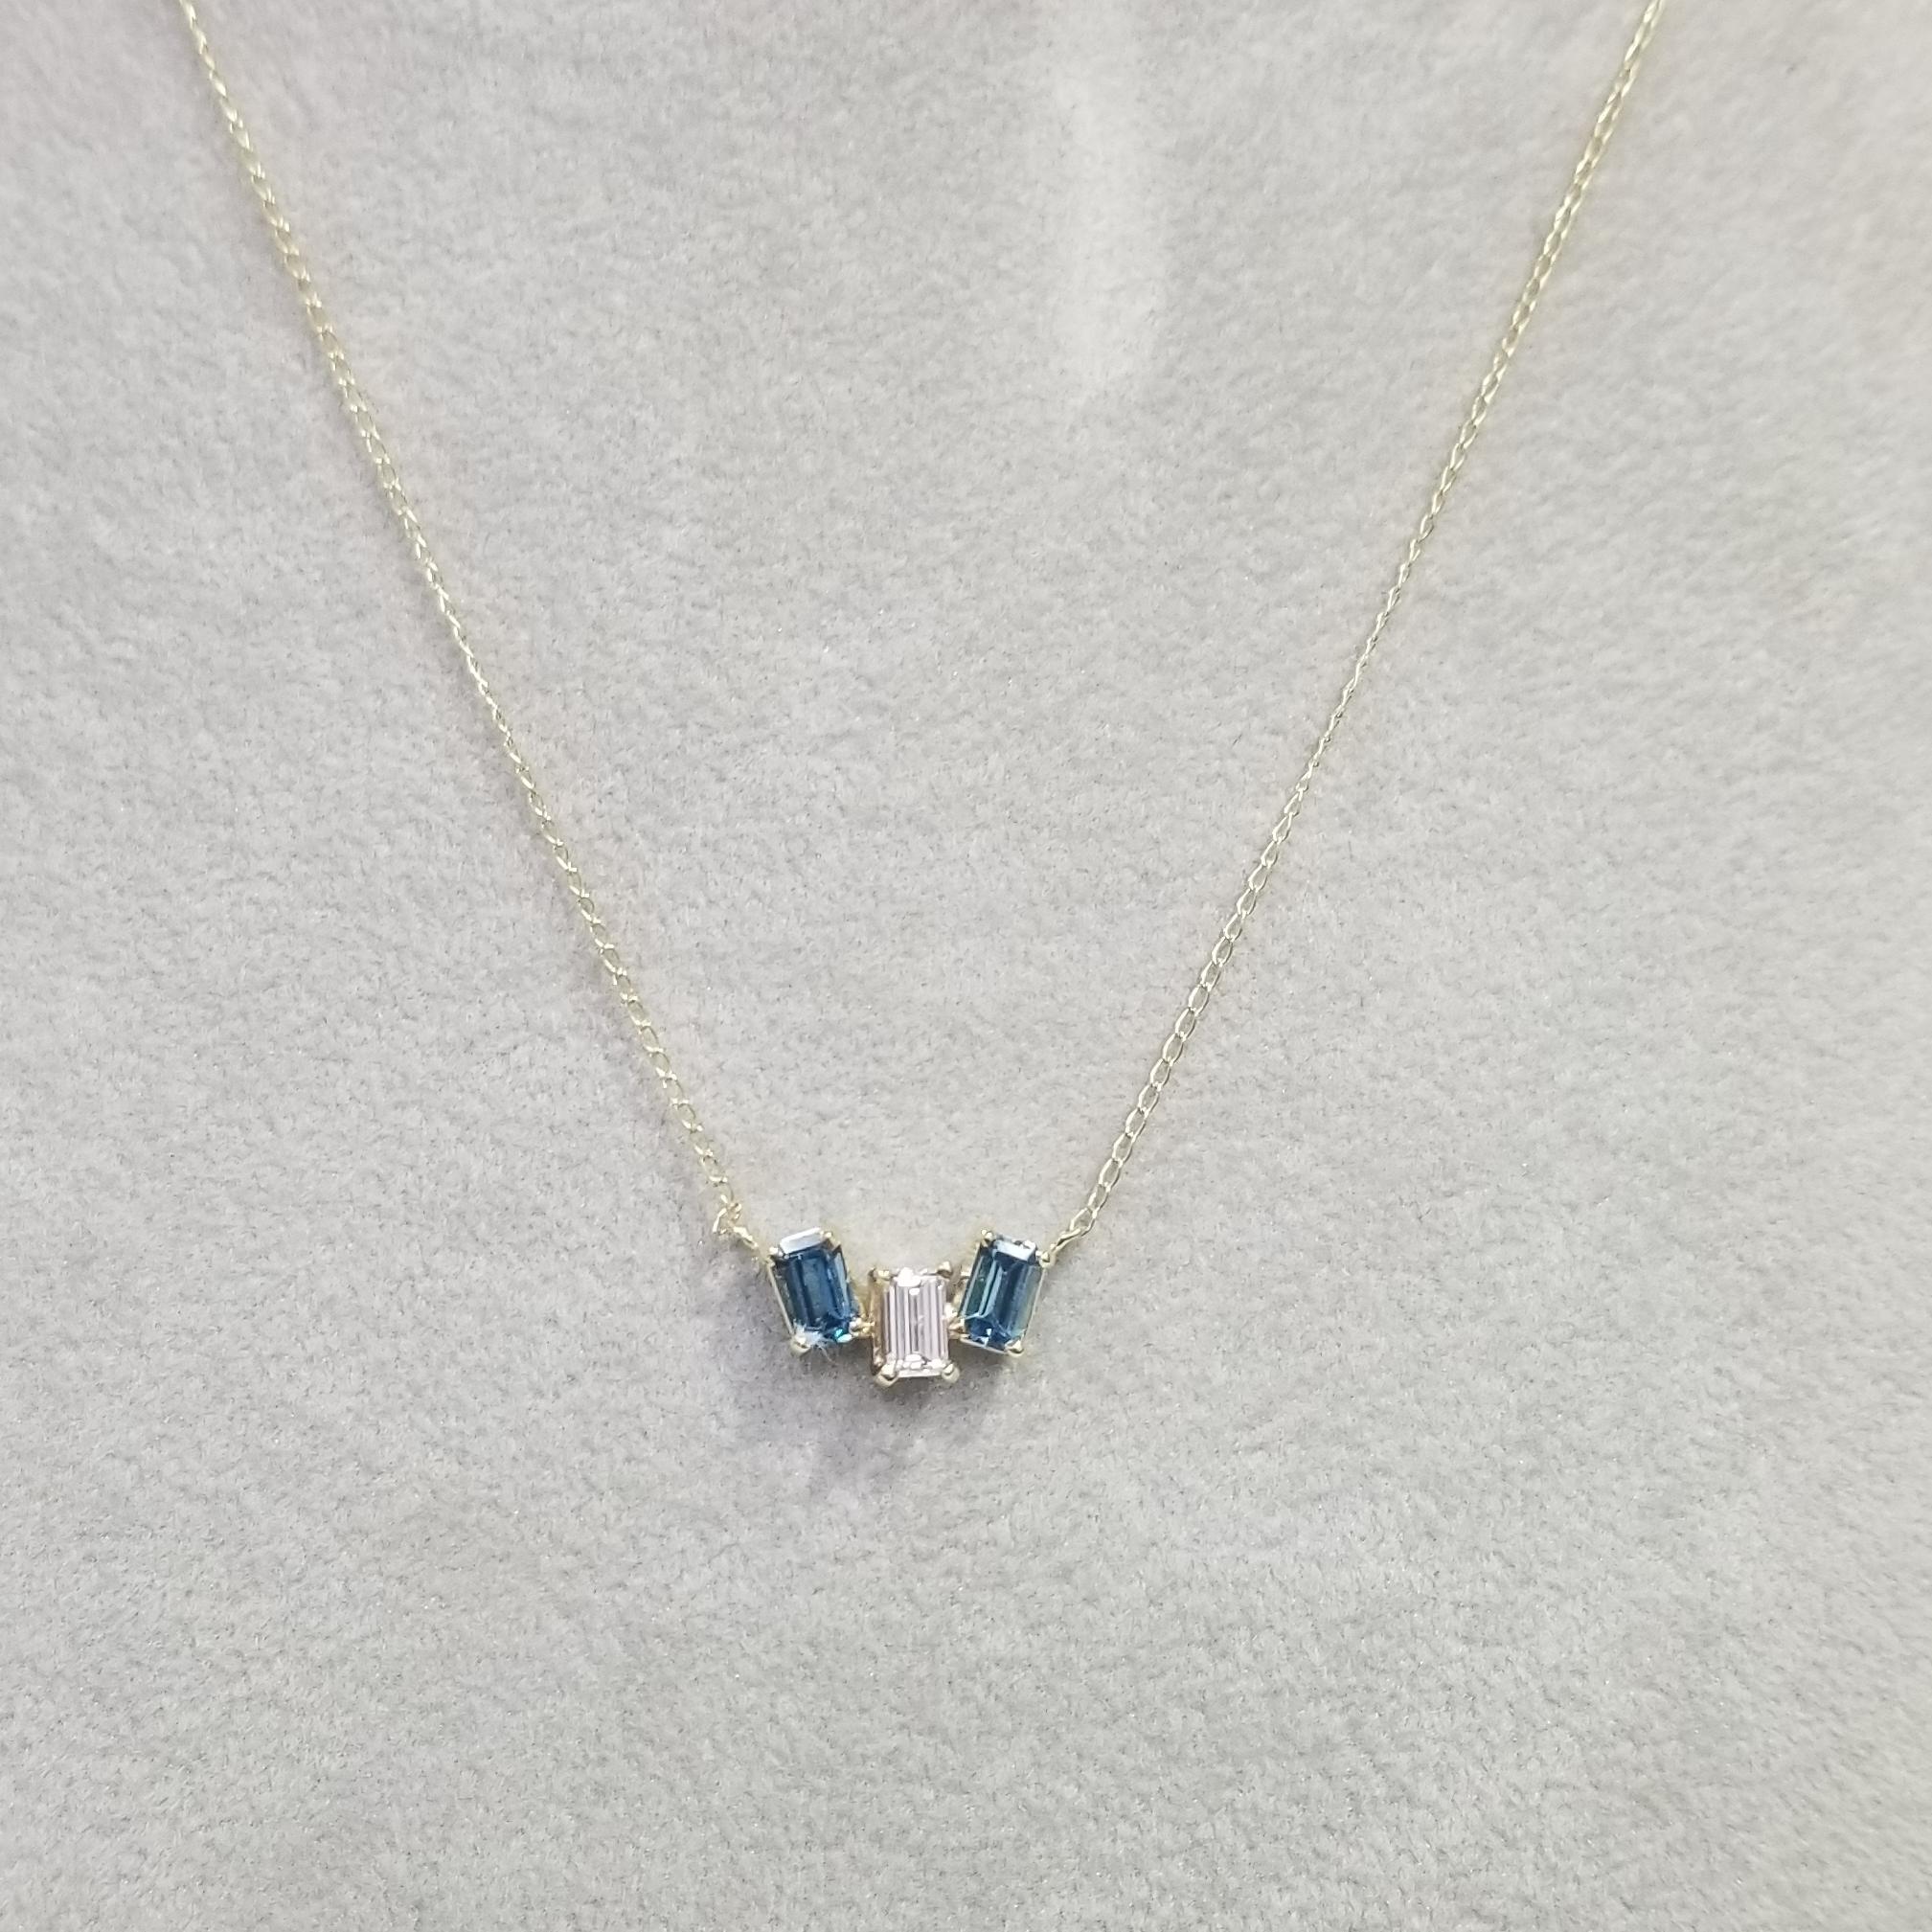 14k yellow gold diamond baguette and blue topaz pendant, with 1 diamond baguette cut weighing .35pts. and 2 topaz baguettes weighing .70pts. on a 14.5 inch chain.